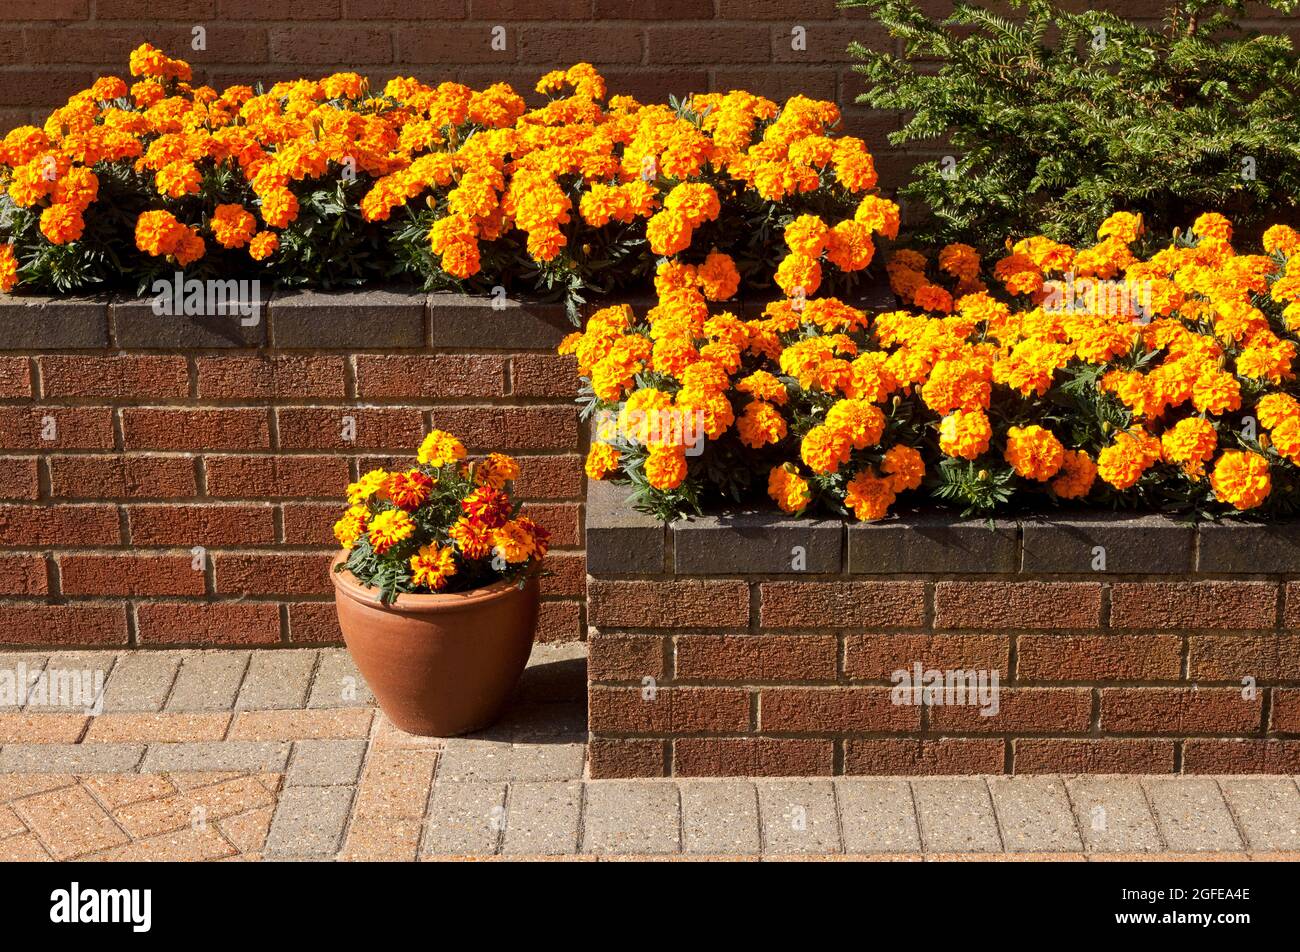 Raised Flower Bed on a Patio with a pot Stock Photo